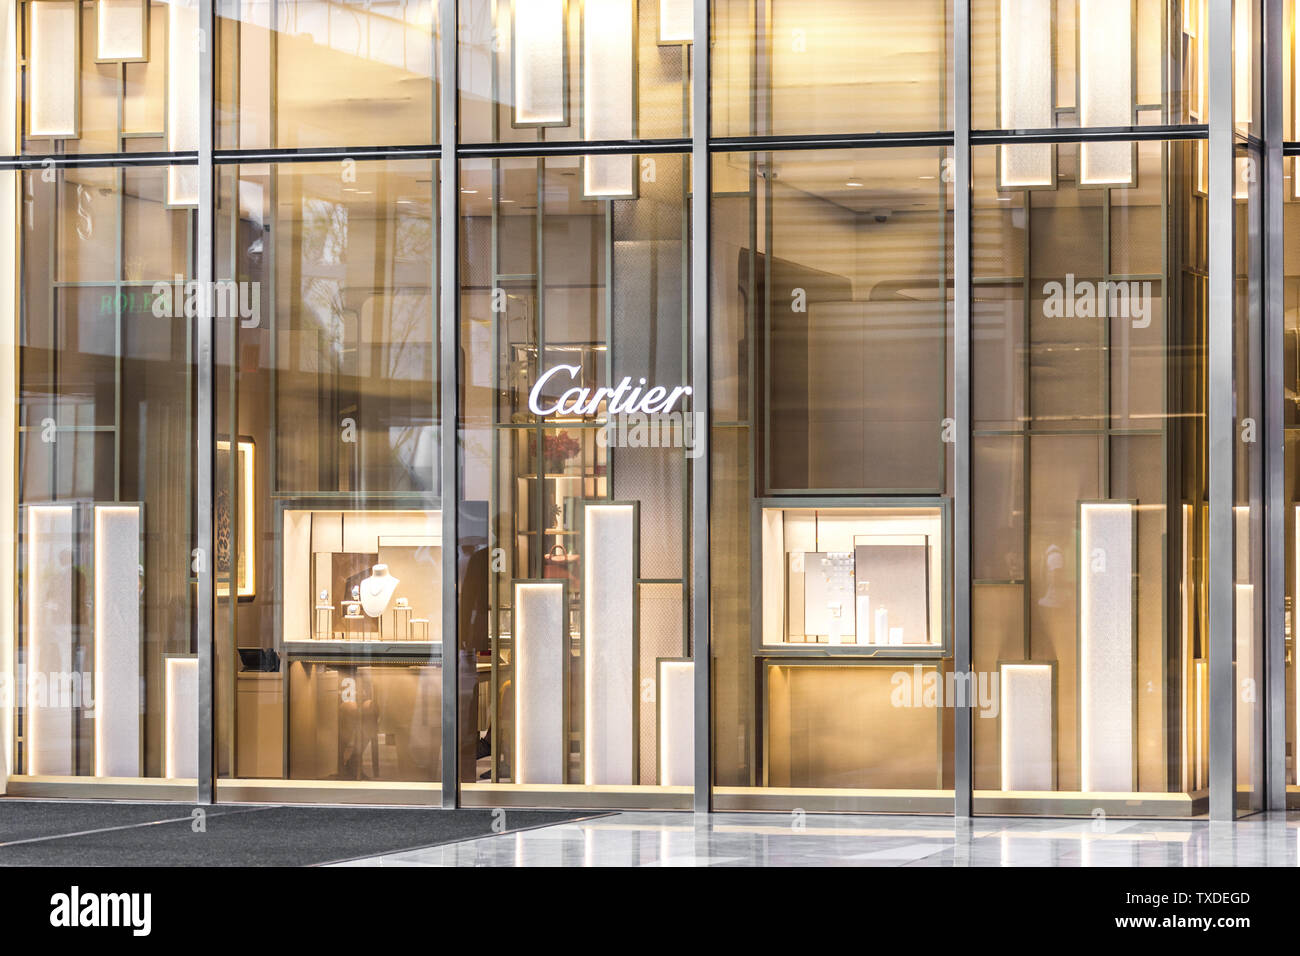 where to buy cartier jewelry in montreal